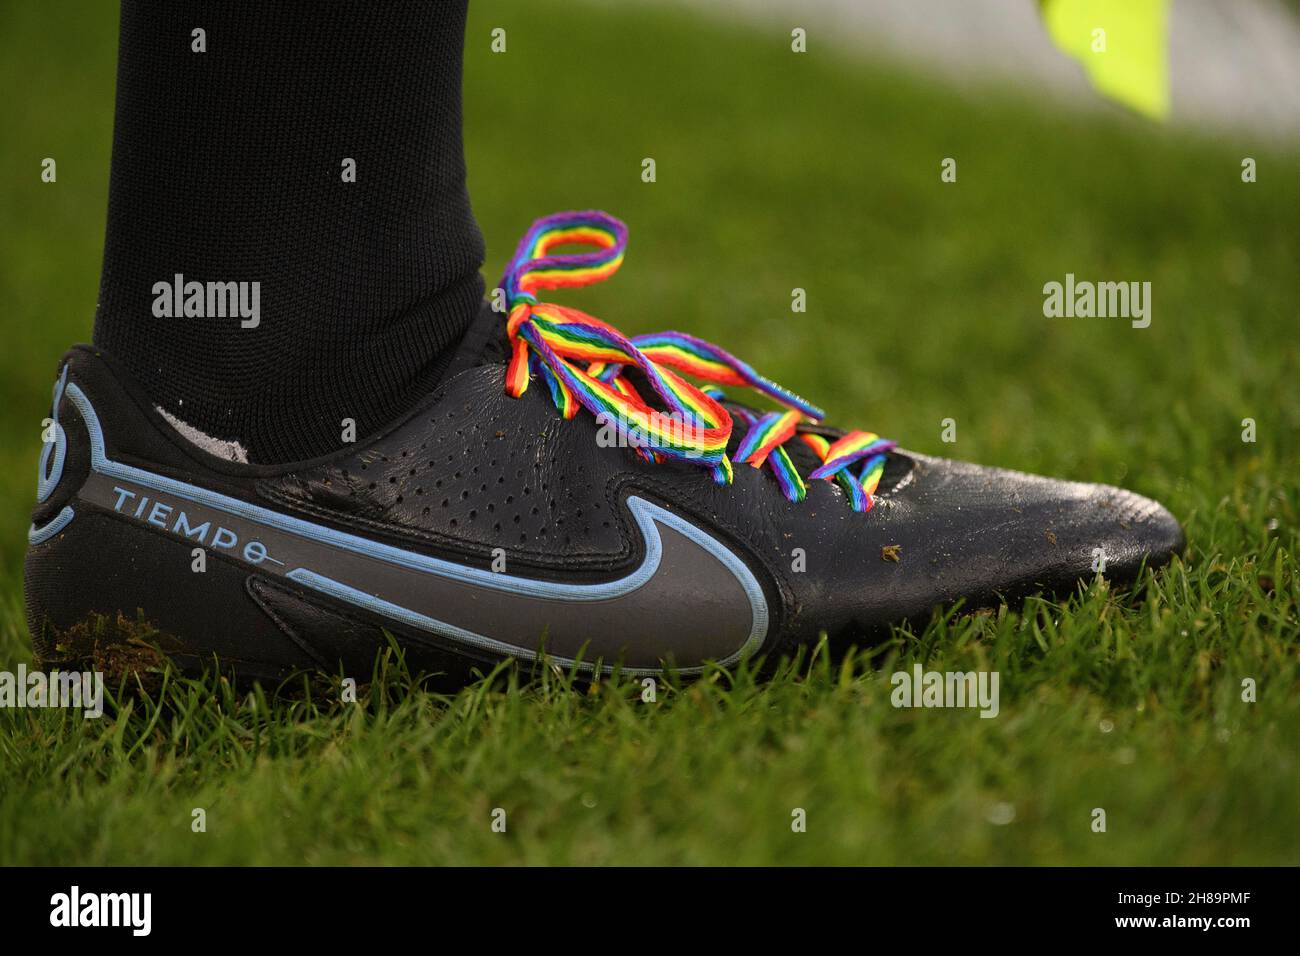 London, UK. 27 November - Crystal Palace v Aston Villa - Premier League - Selhurst Park  Rainbow laces worn by the linesman during the match at Selhurst Park  Picture Credit : © Mark Pain / Alamy Live News Stock Photo